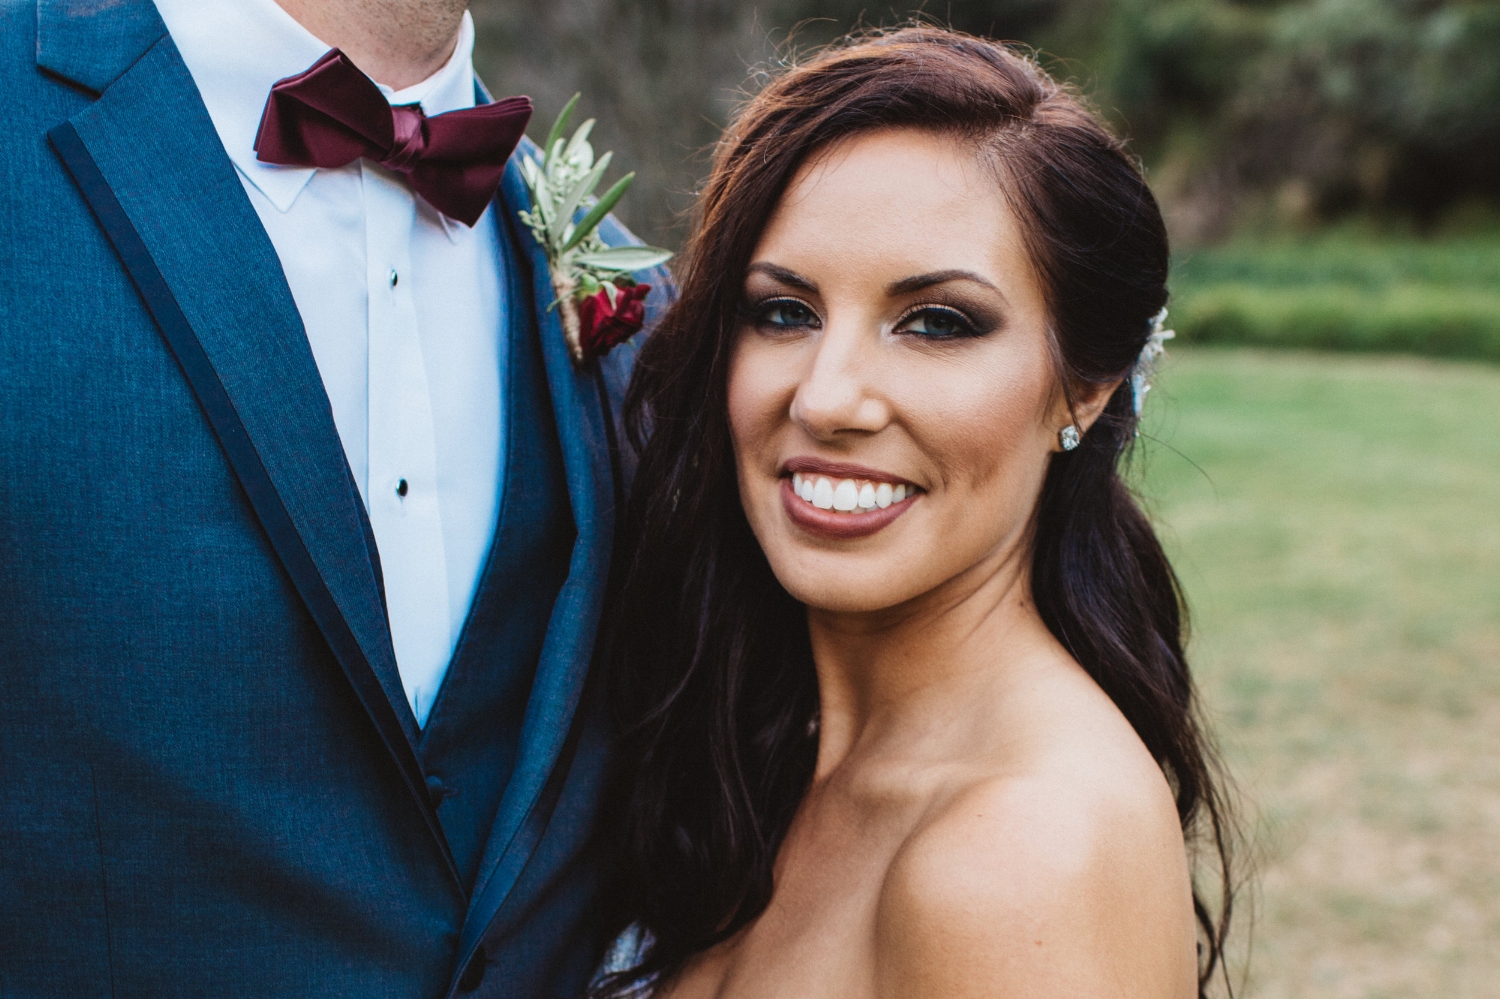 Brunette Bride with Long Hairstyle Down and Smokey Eye Makeup in Outdoor Wedding Photos. Bridal hair and makeup by Vanity Belle in Orange County (Costa Mesa) and San Diego (La Jolla)